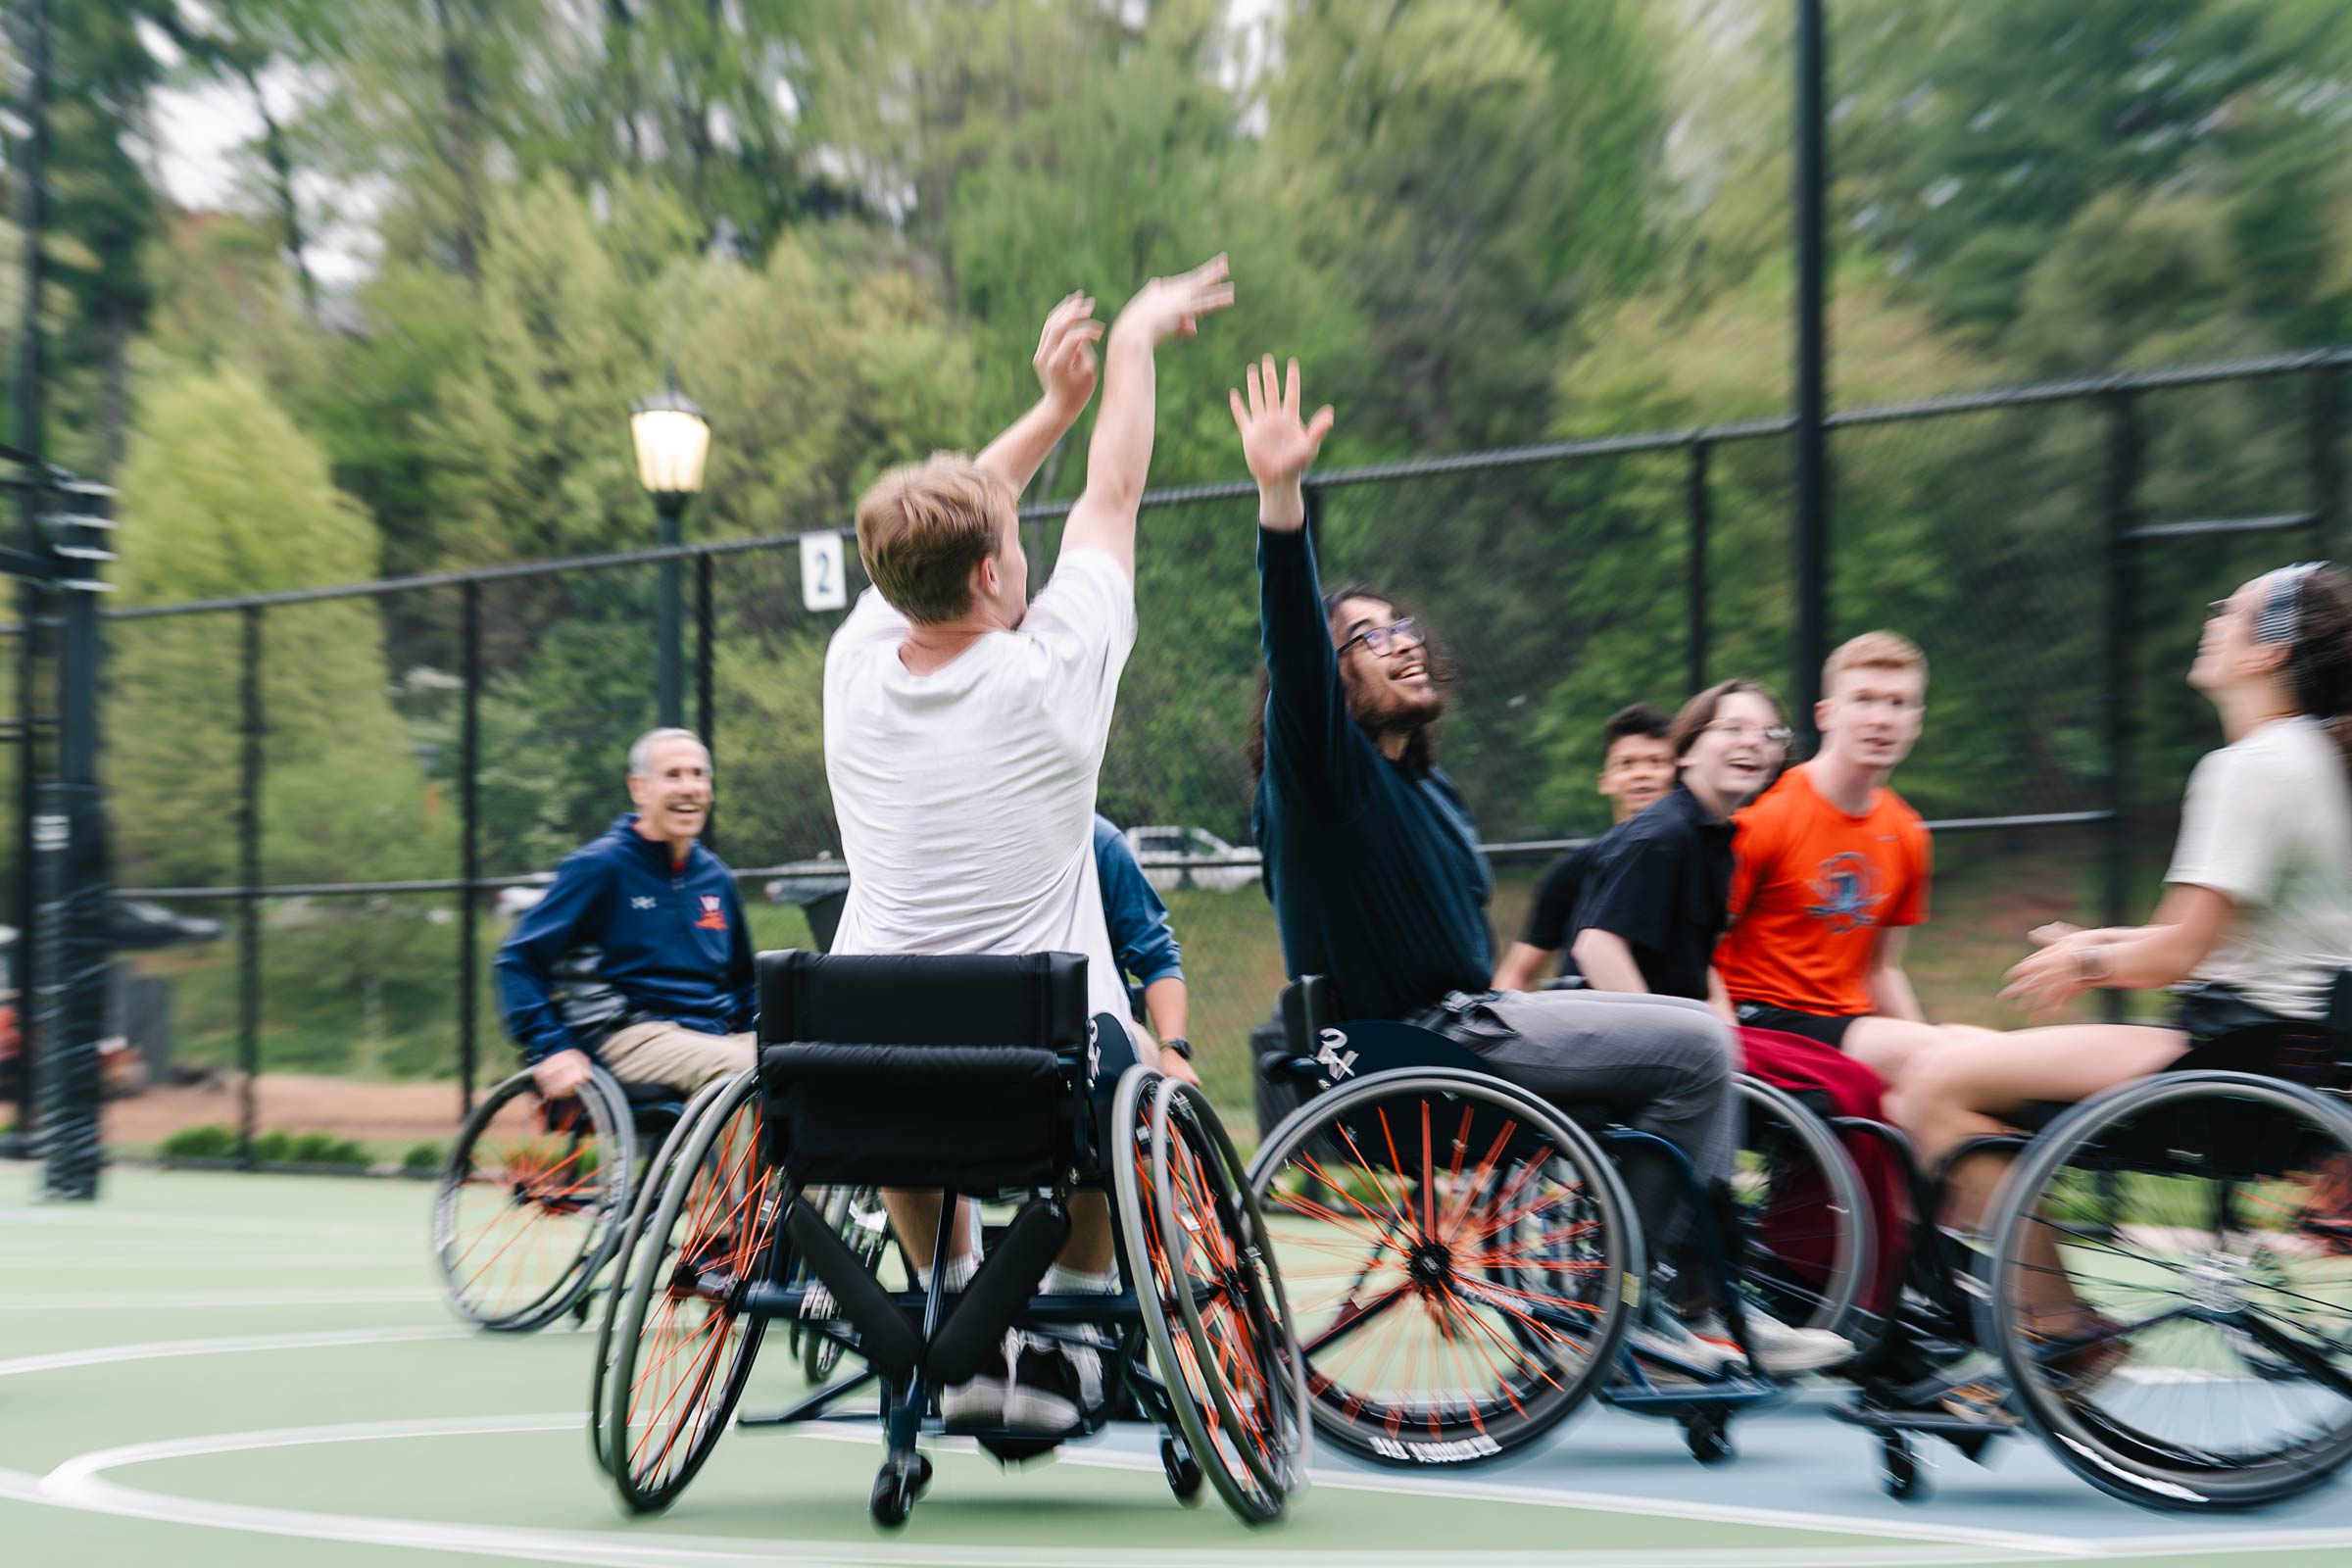 Picture of an individual with disabilities shooting basketball to score a point.